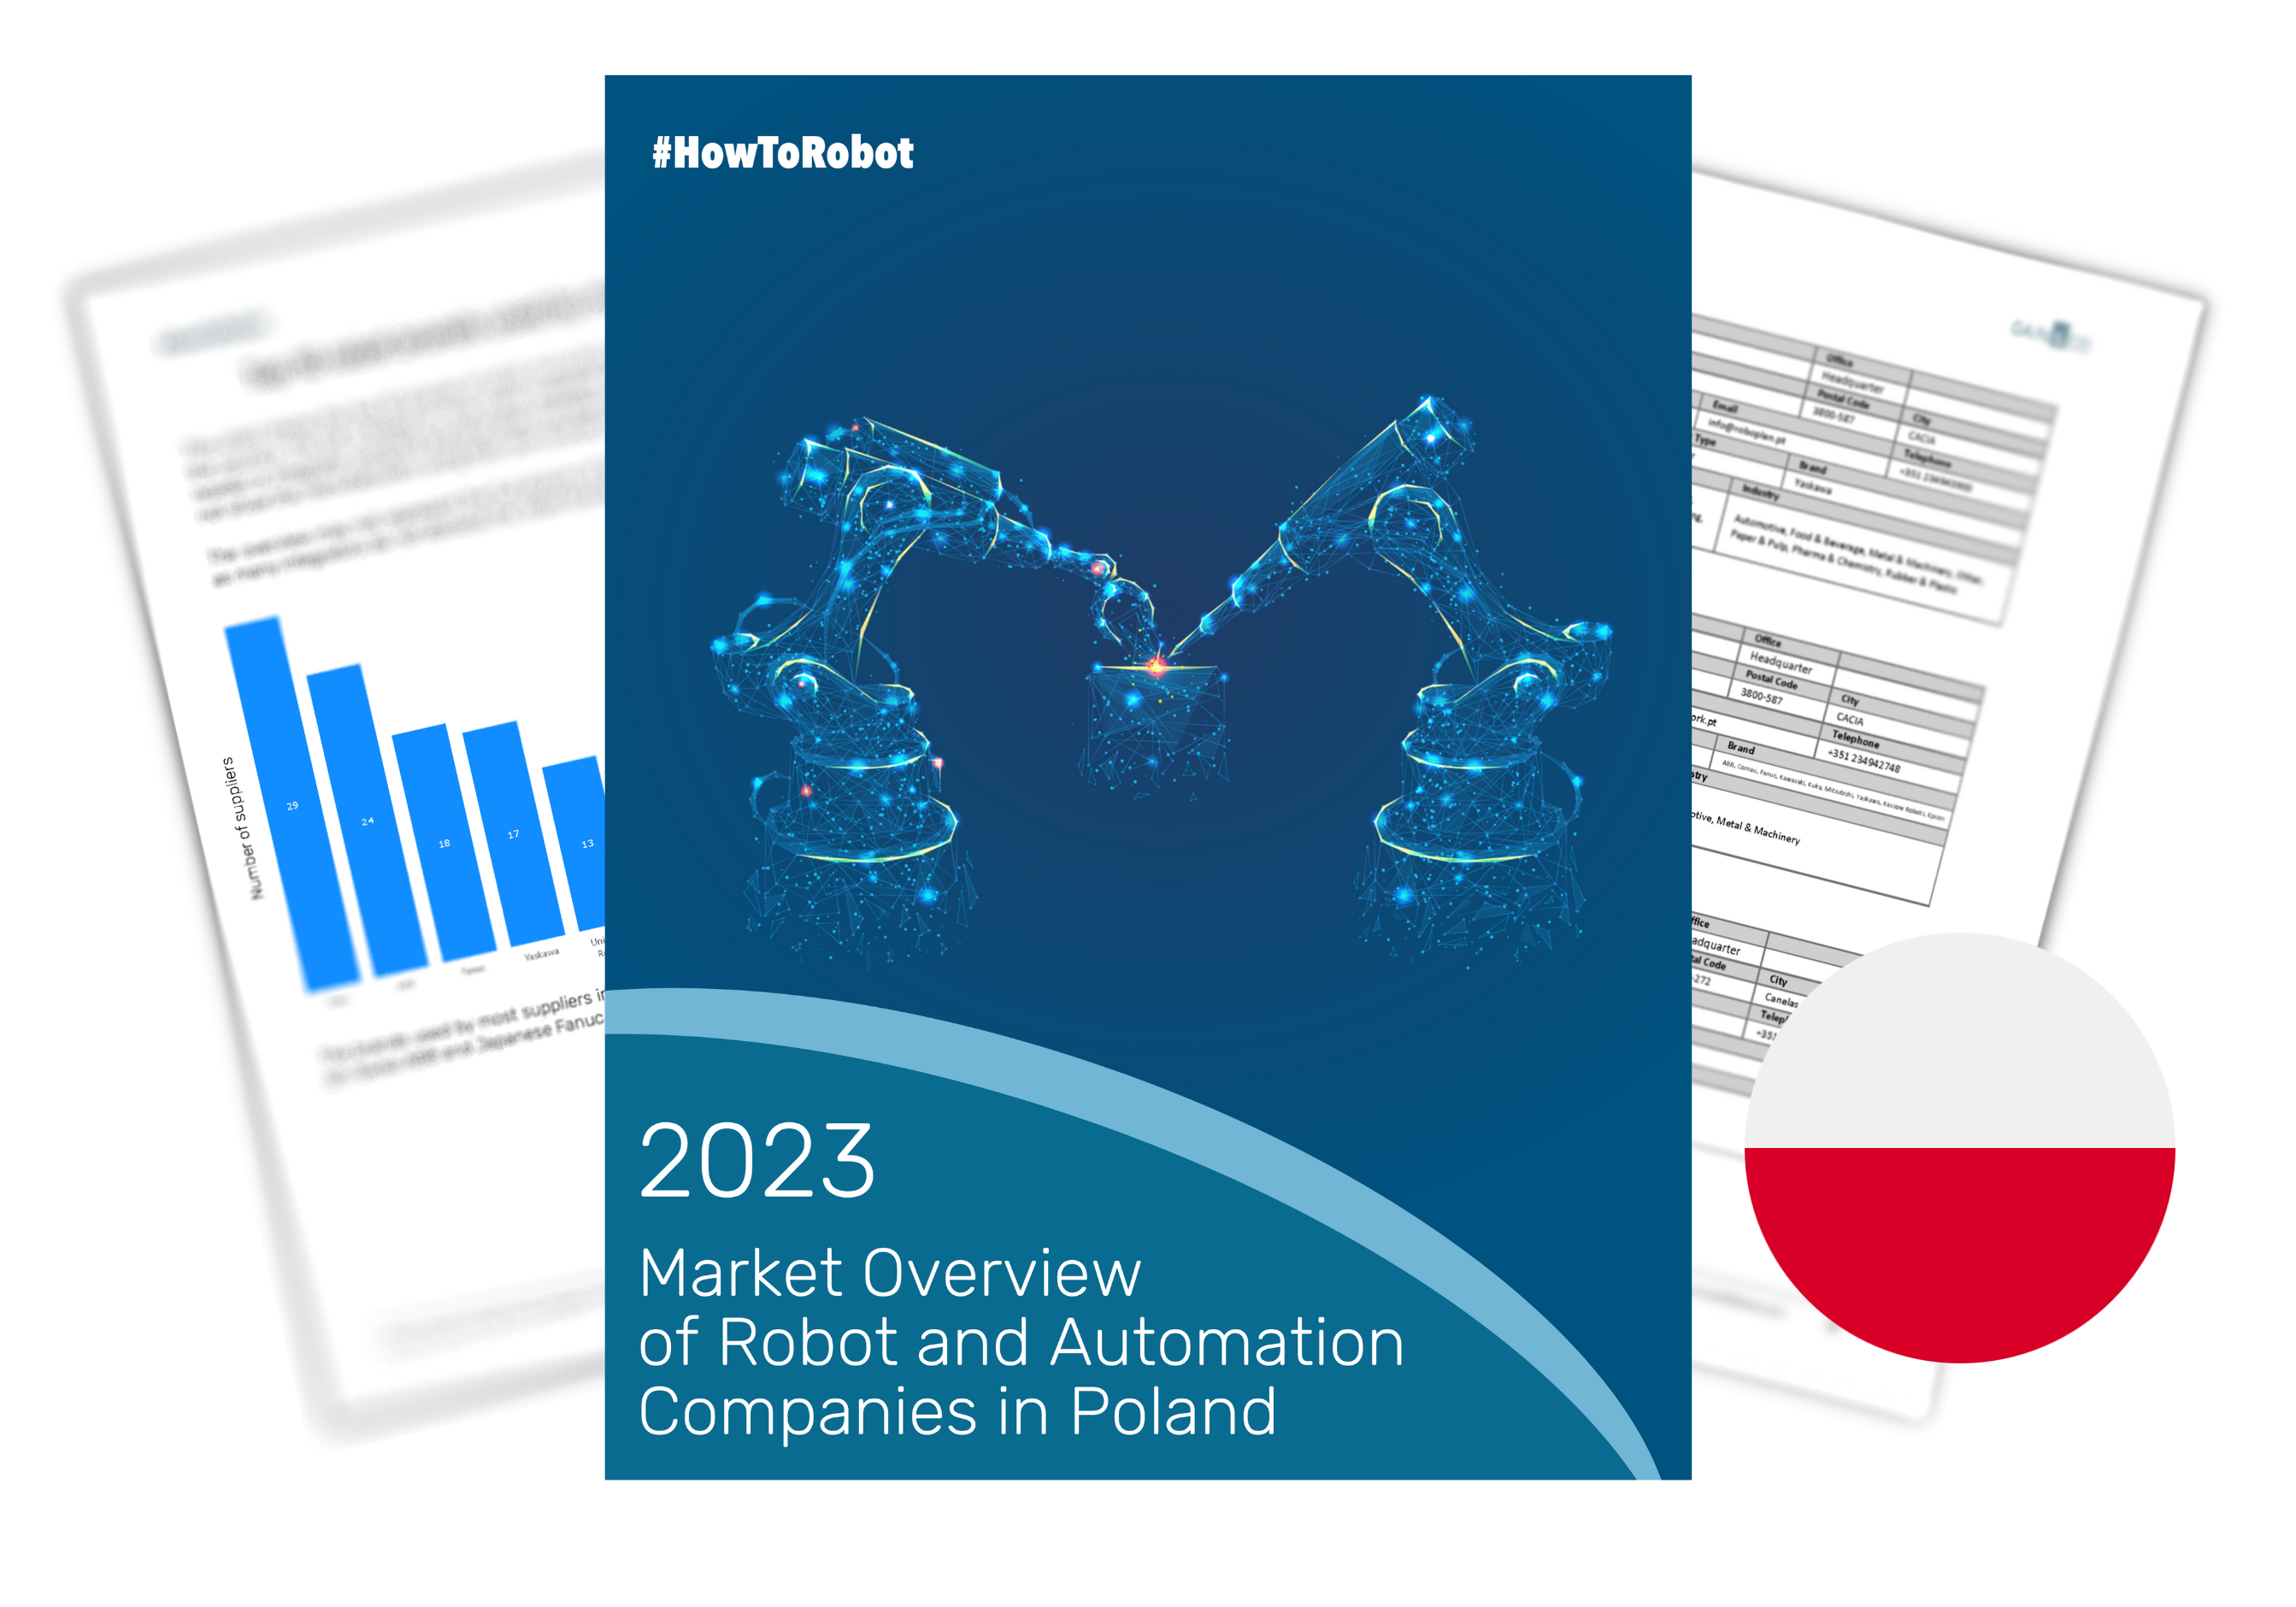 Market Overview of Robot and Automation Companies in Poland